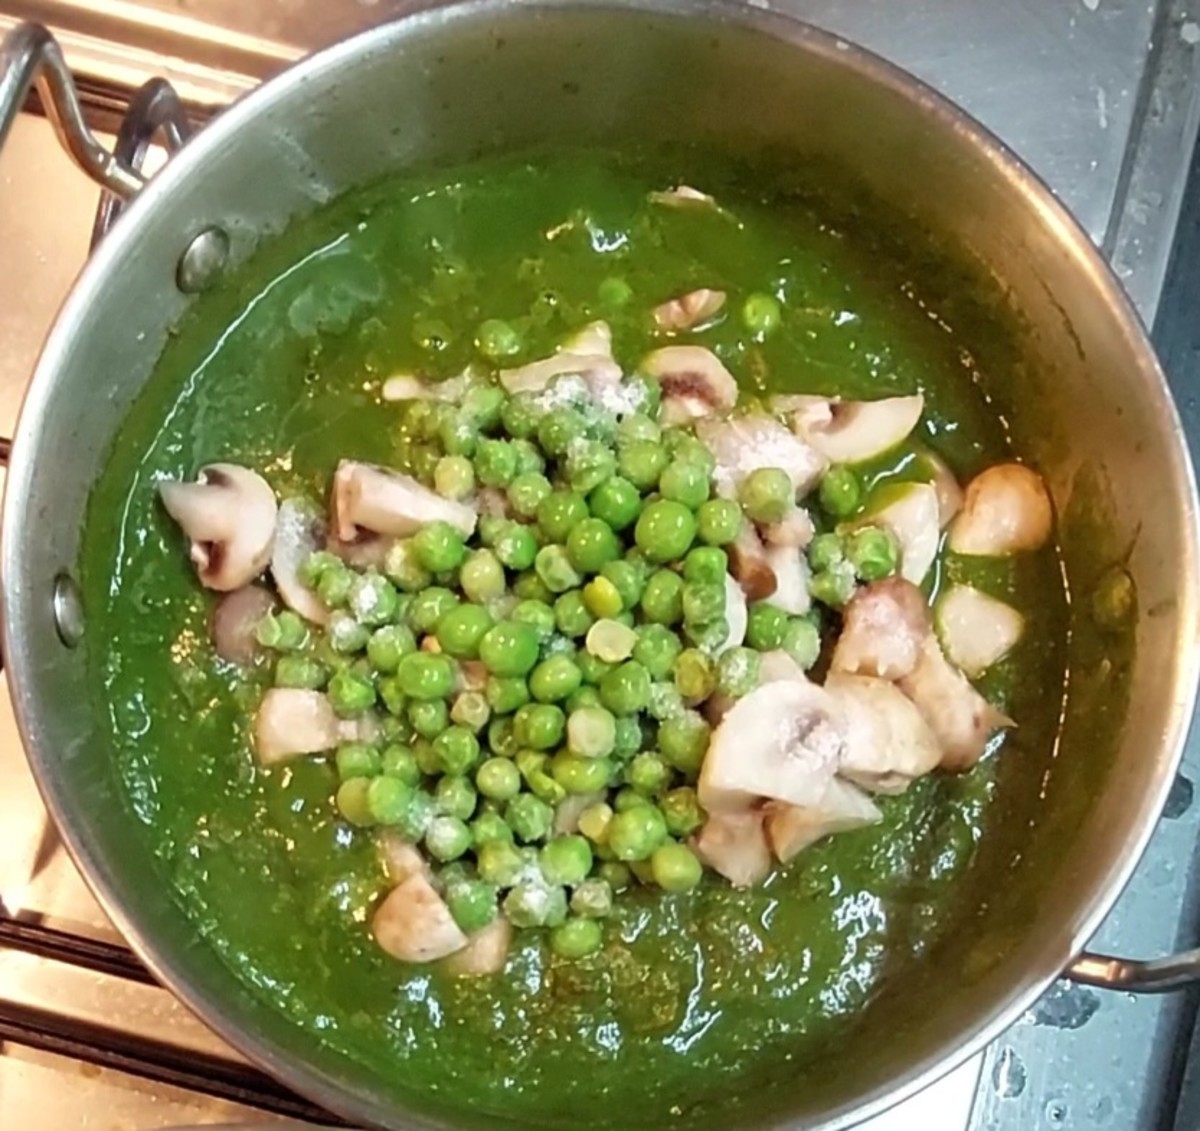 Add 200 grams chopped muhrooms and 1/4 cup peas. Add salt to taste and mix well.